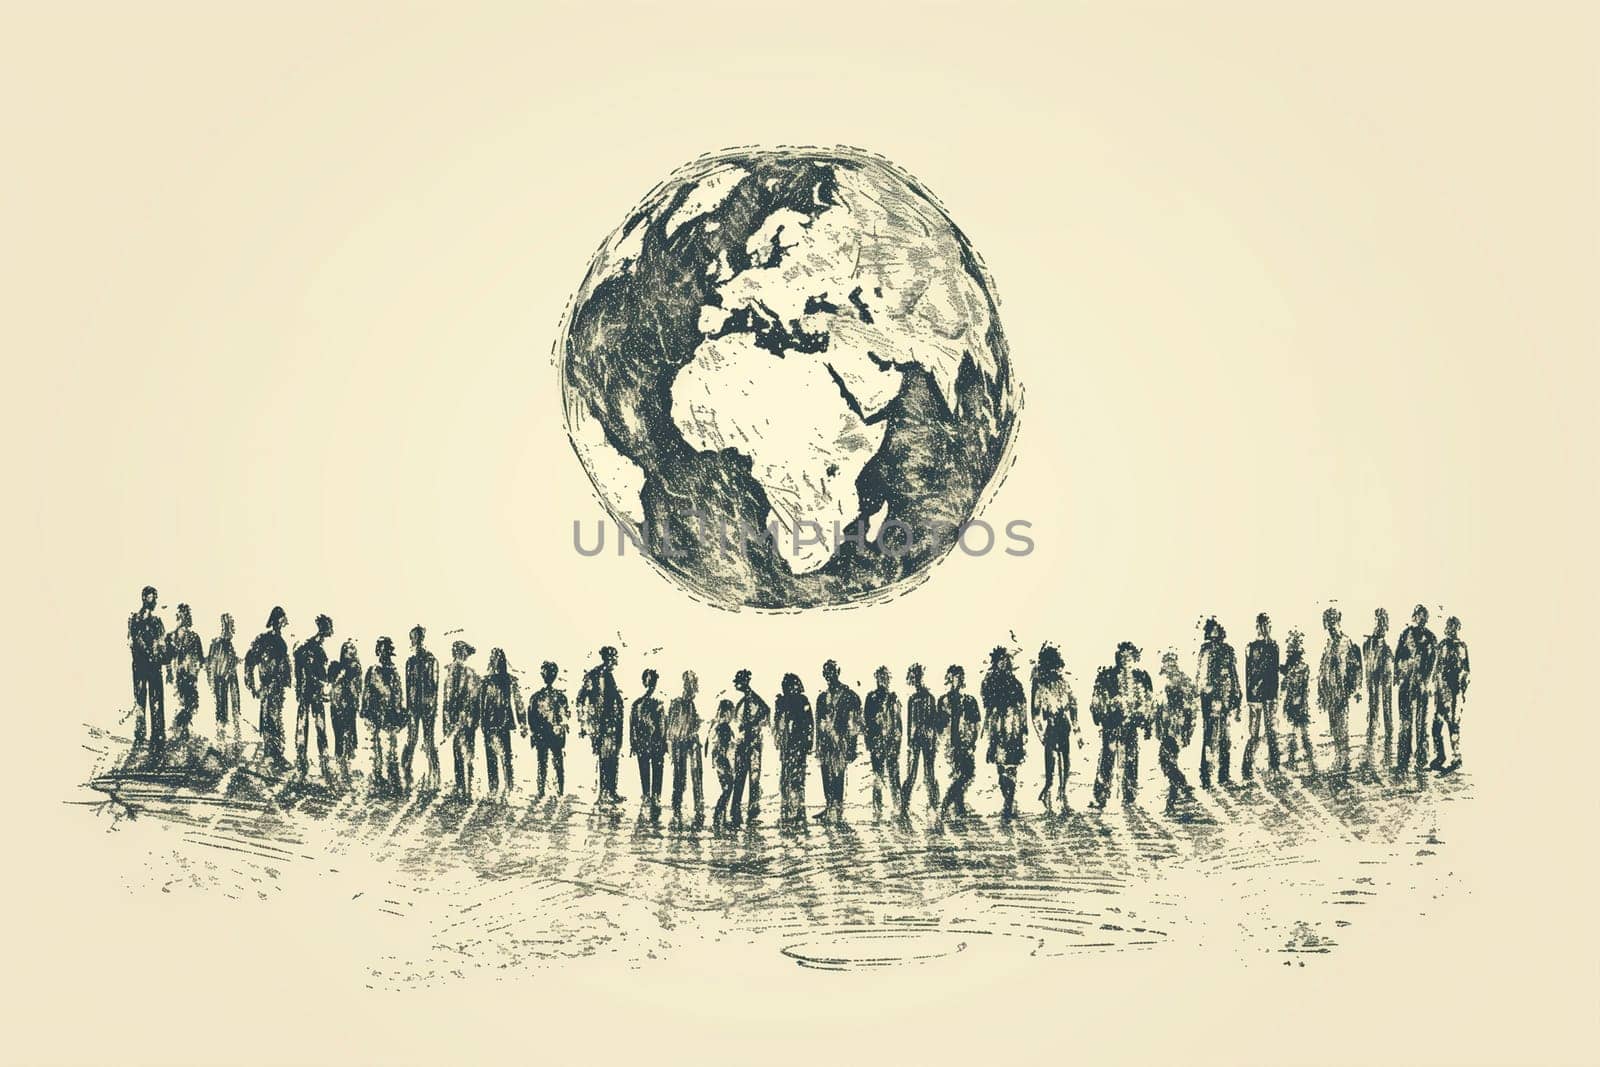 A group of sketched figures forms a circle around an intricately drawn Earth, symbolizing global unity and awareness on World Population Day.